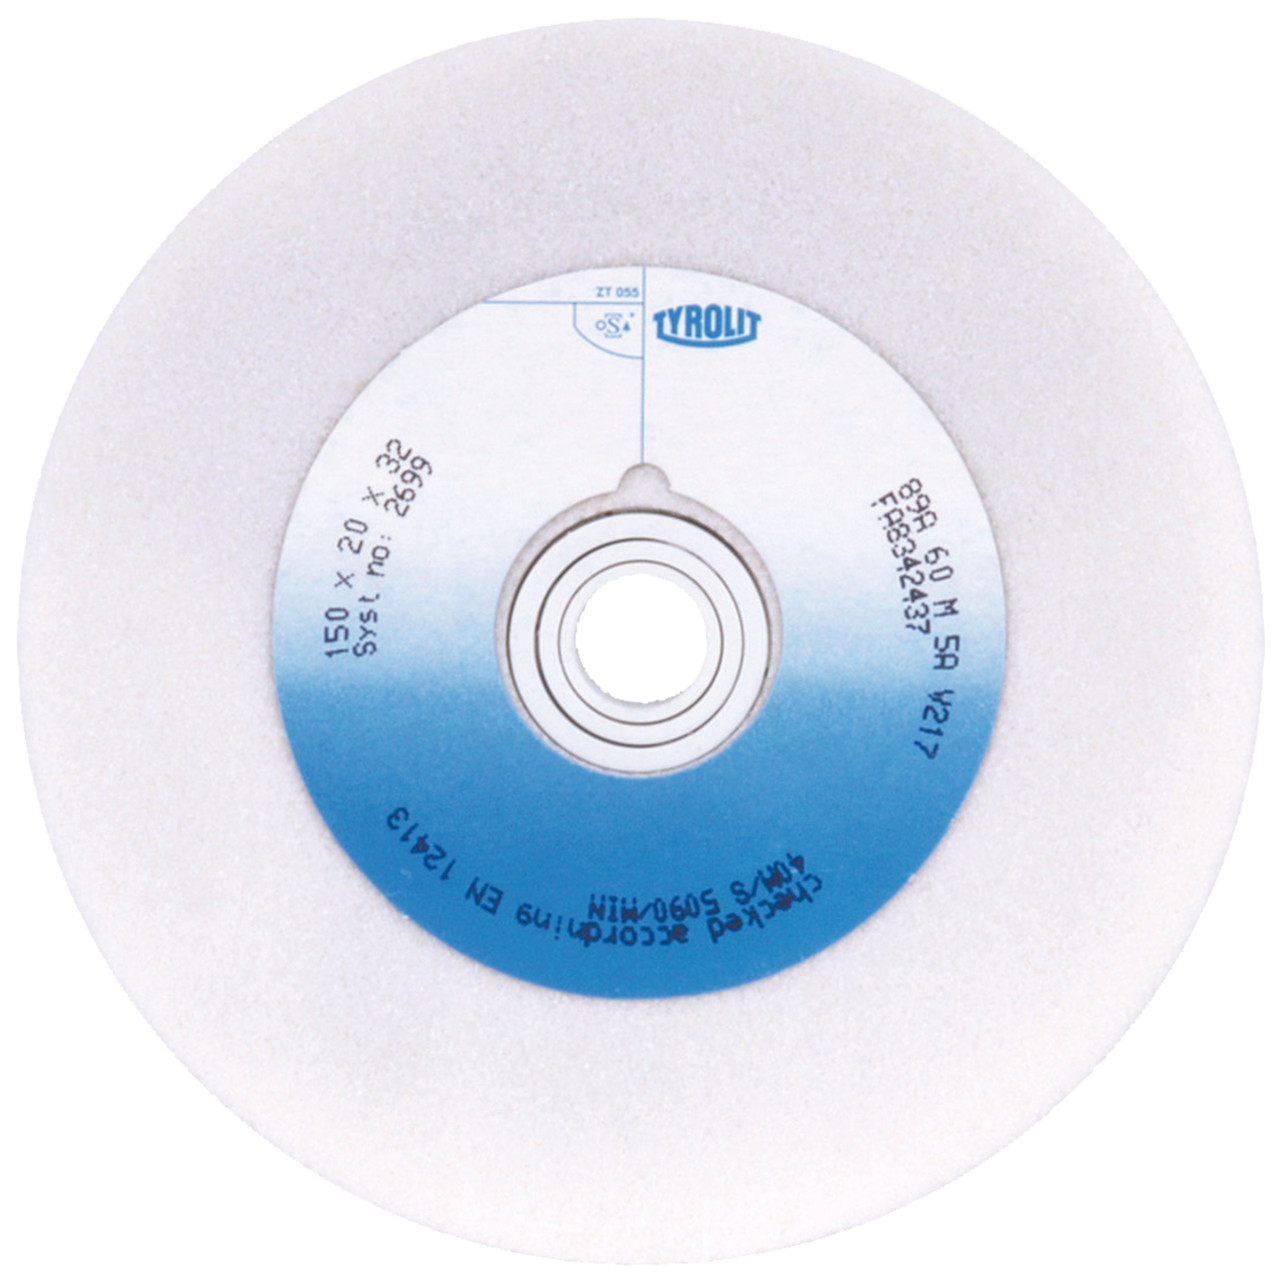 Tyrolit Conventional ceramic grinding discs DxDxH 175x25x51 For high-alloy steels and HSS, shape: 1, Art. 723118